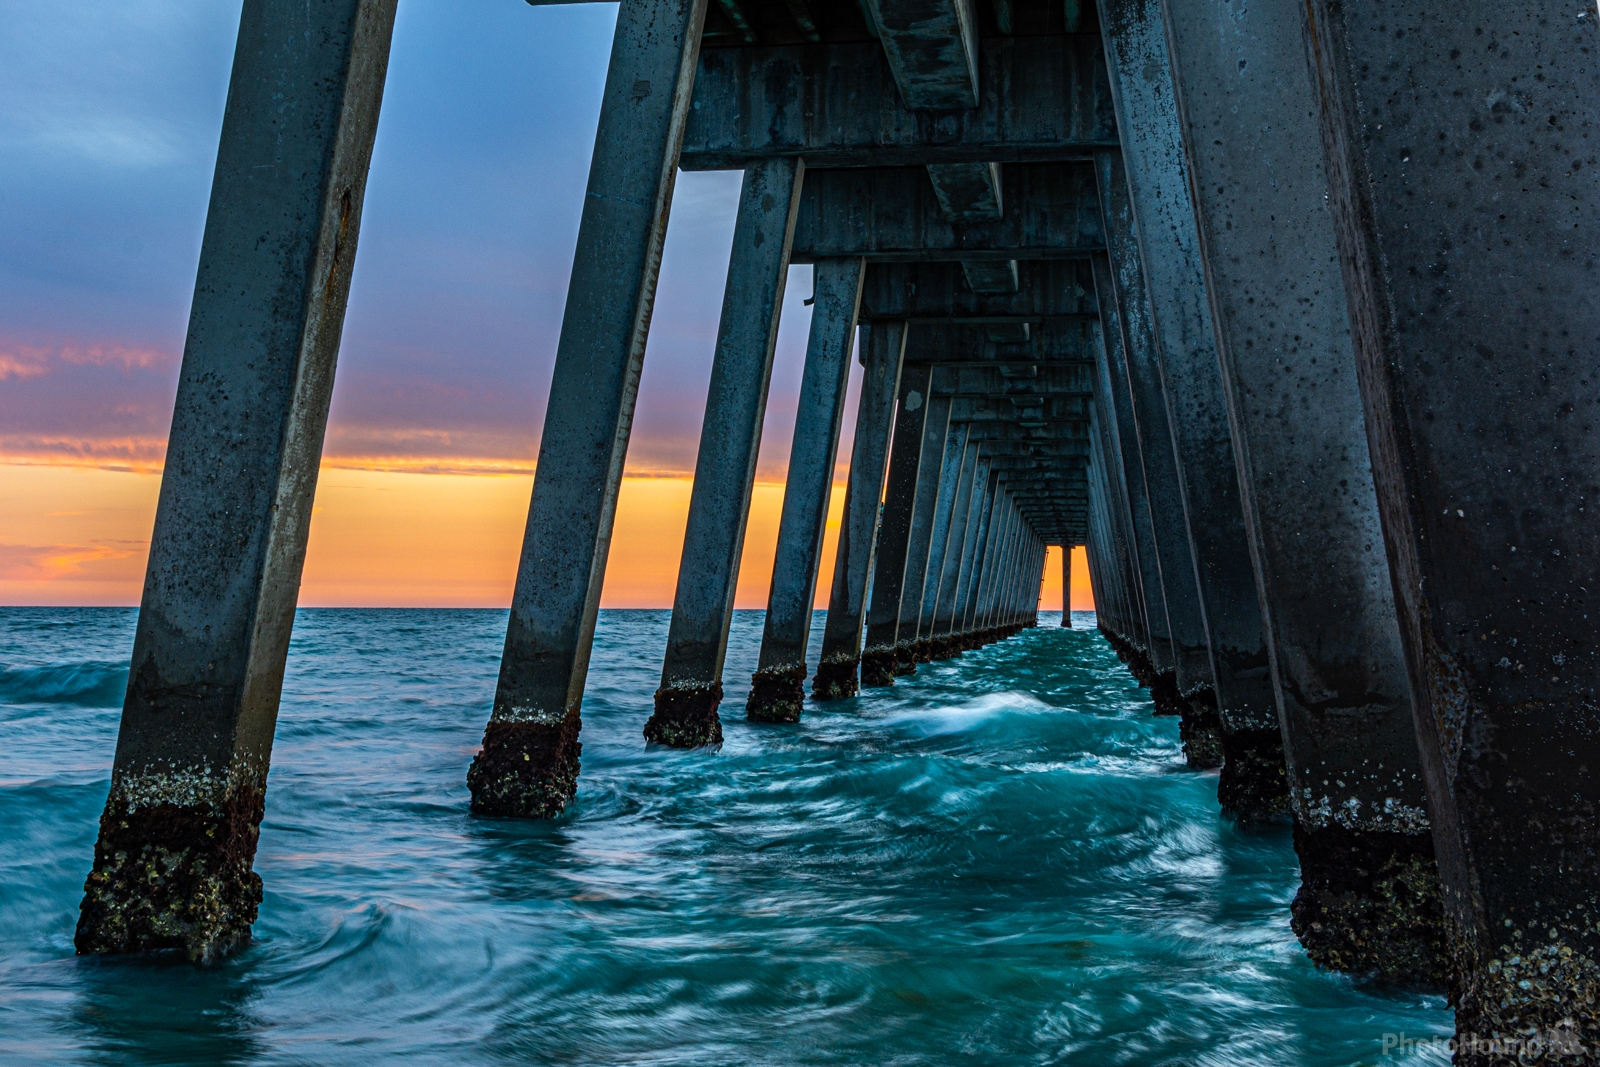 Image of Venice Fishing Pier by Wayne Foote